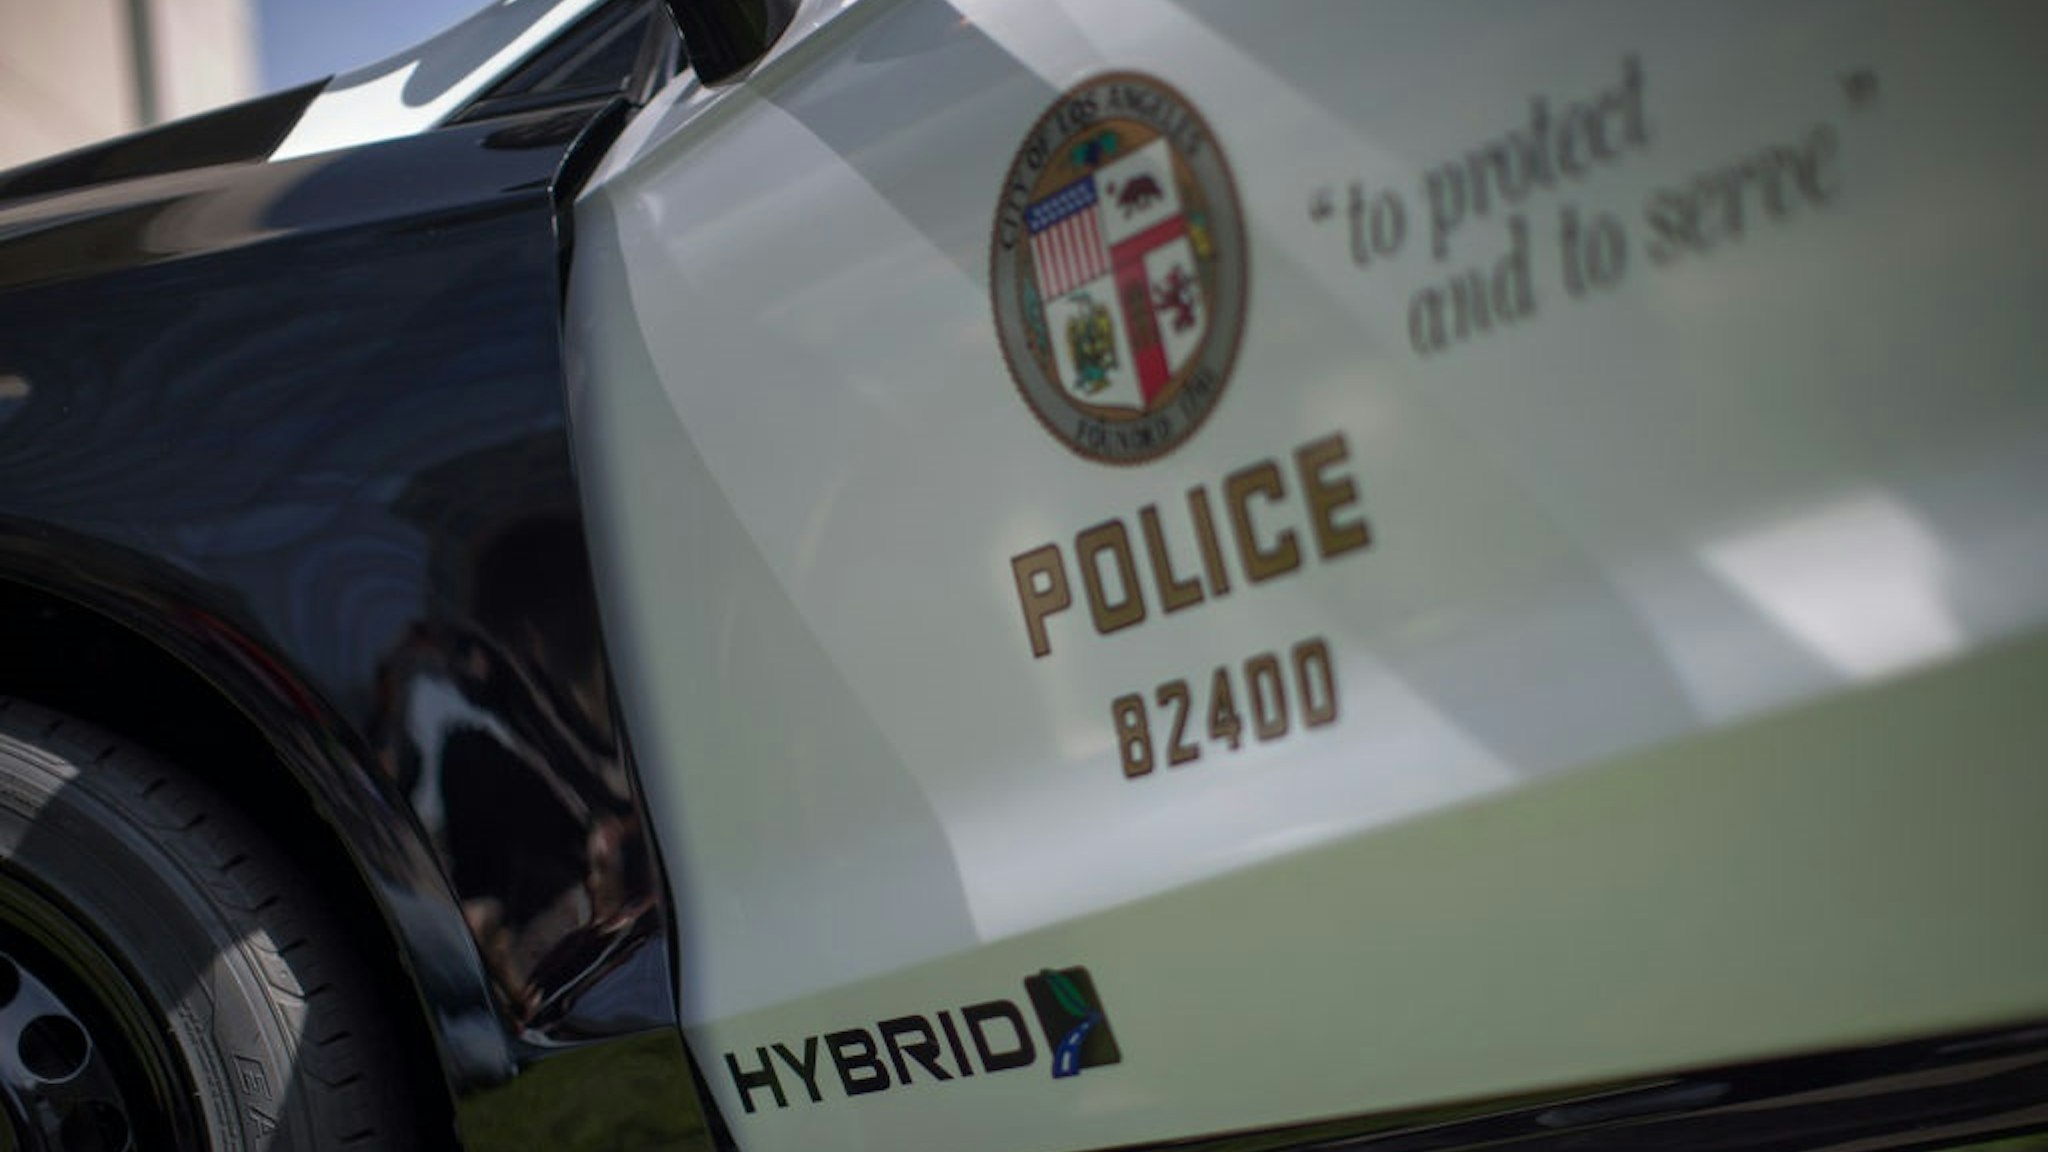 OS ANGELES, CA - APRIL 10: A hybrid police car is seen at the unveiling of two new Ford Fusion hybrid pursuit-rated Police Responder cars at Los Angeles Police Department headquarters on April 10, 2017 in Los Angeles, California.